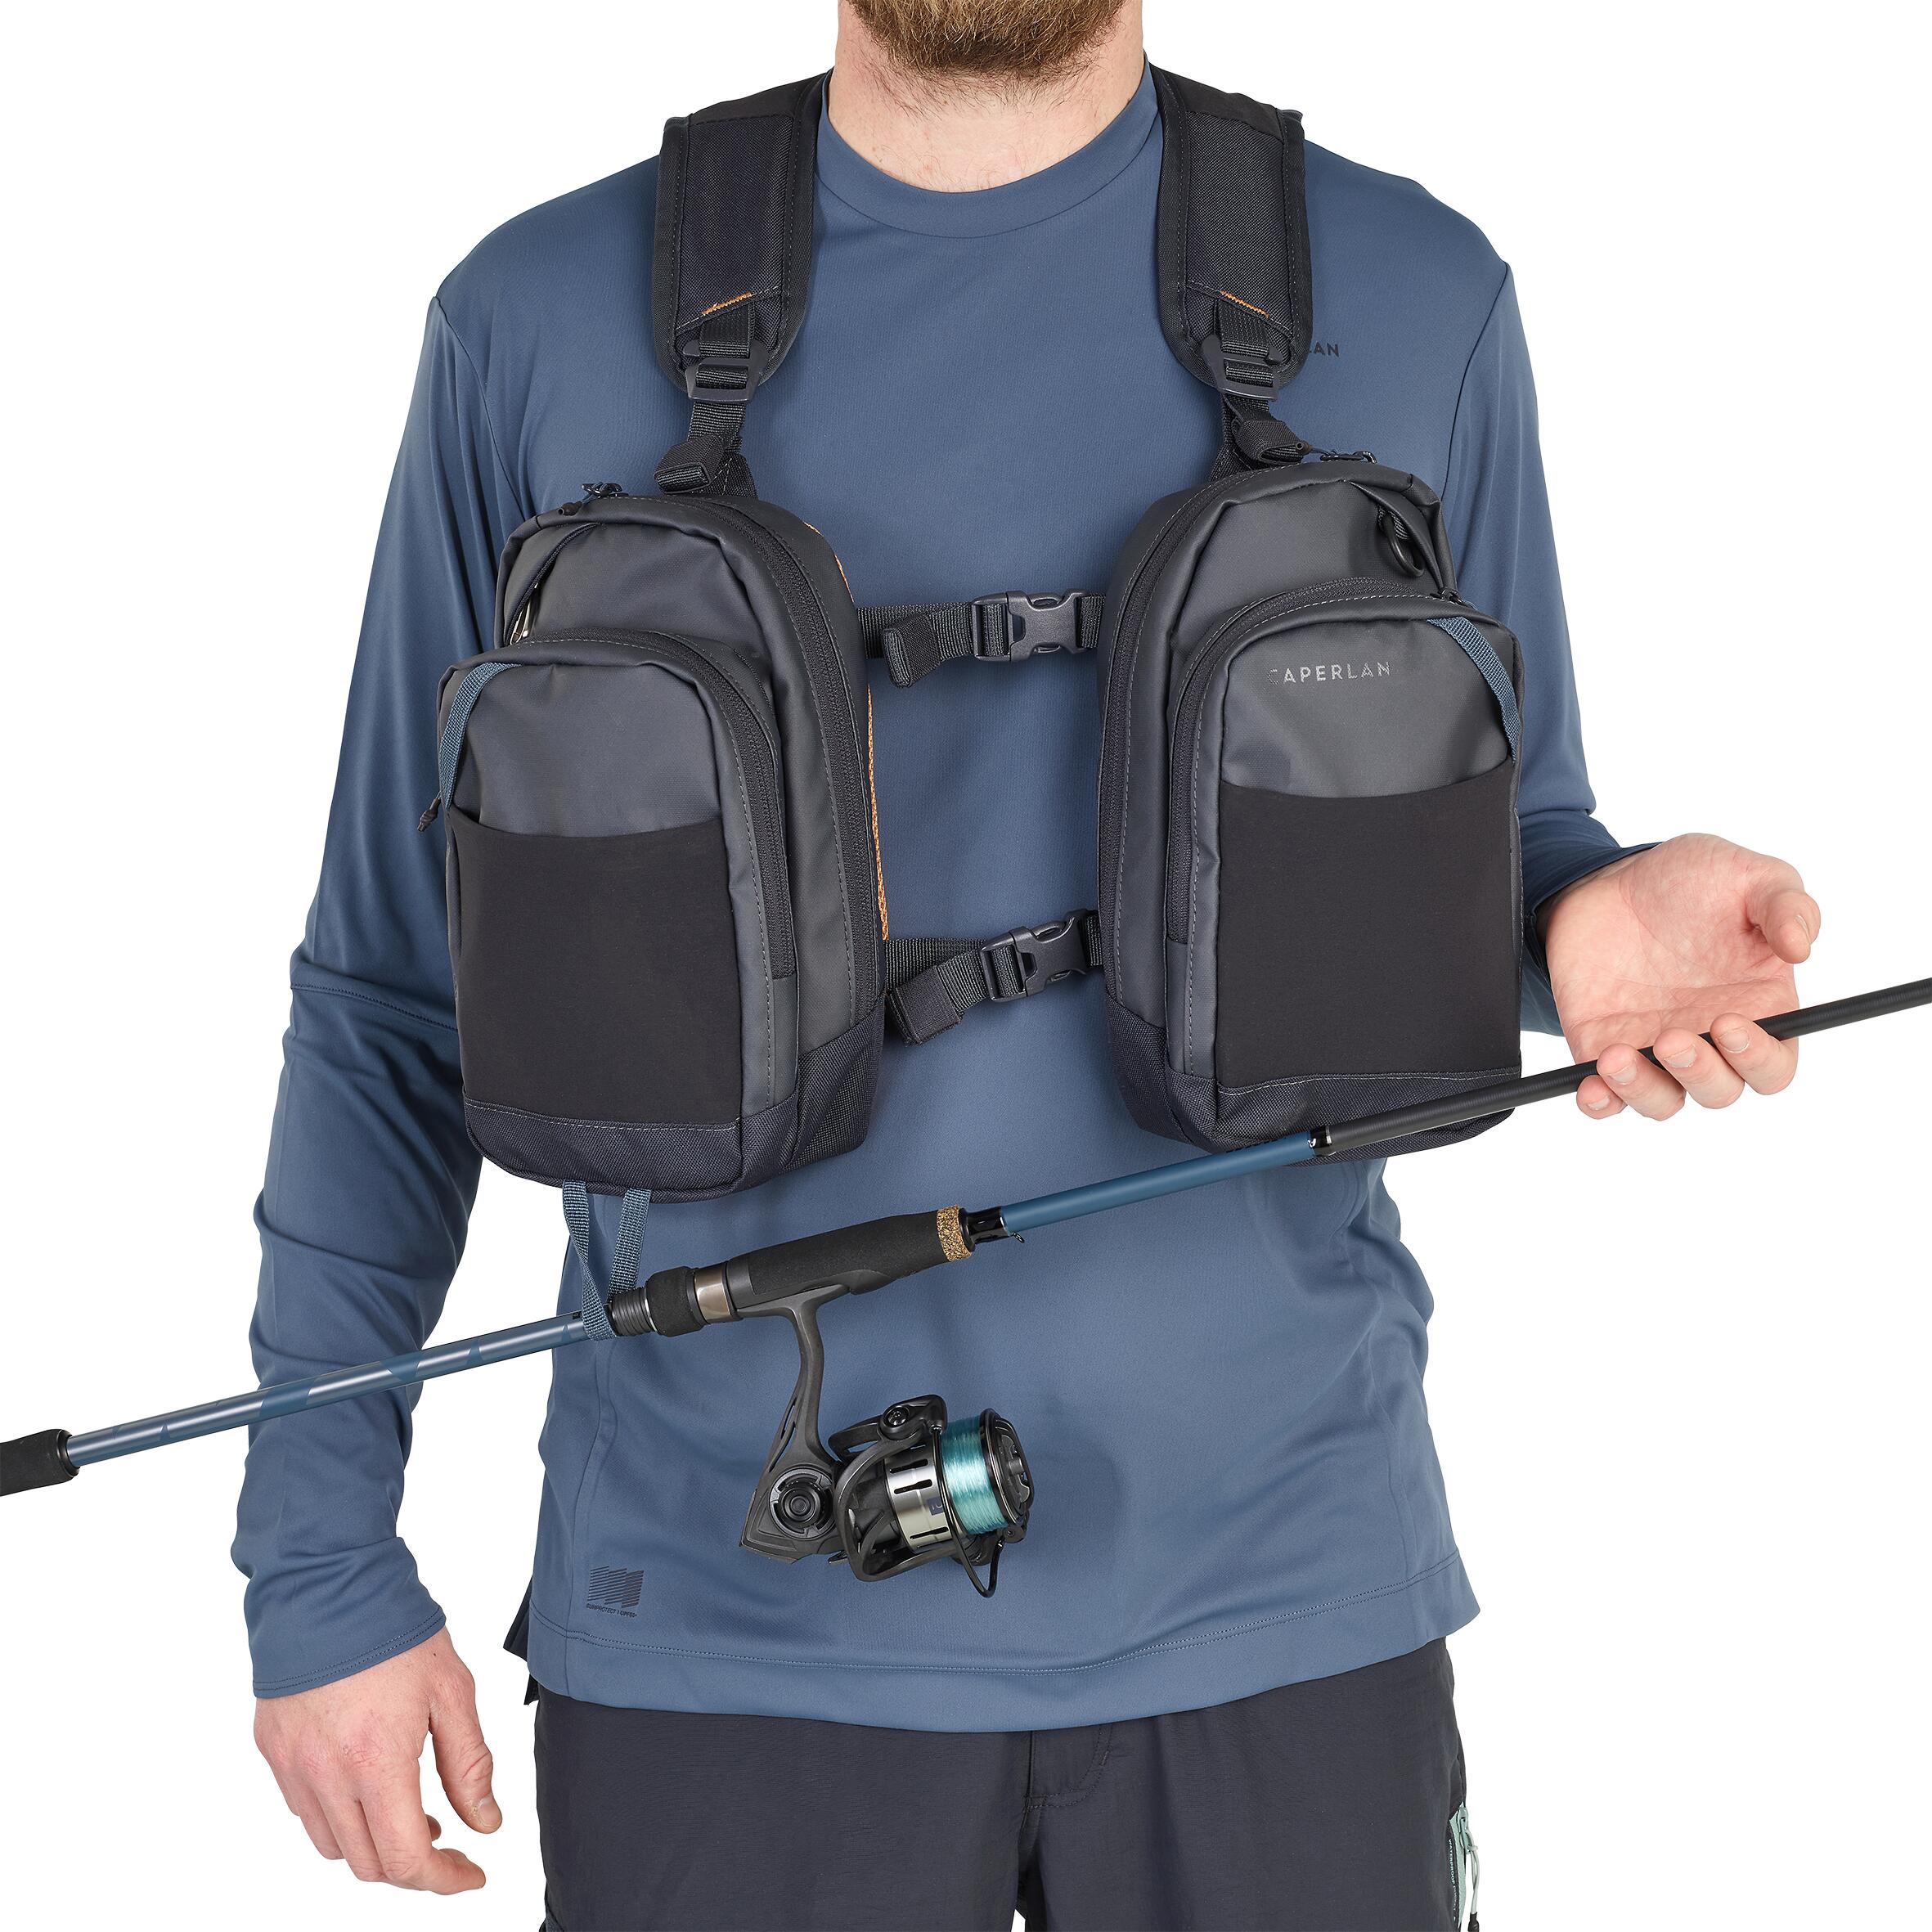 Dual Fishing Chest Pack 10 L - 500 - Carbon grey - Caperlan